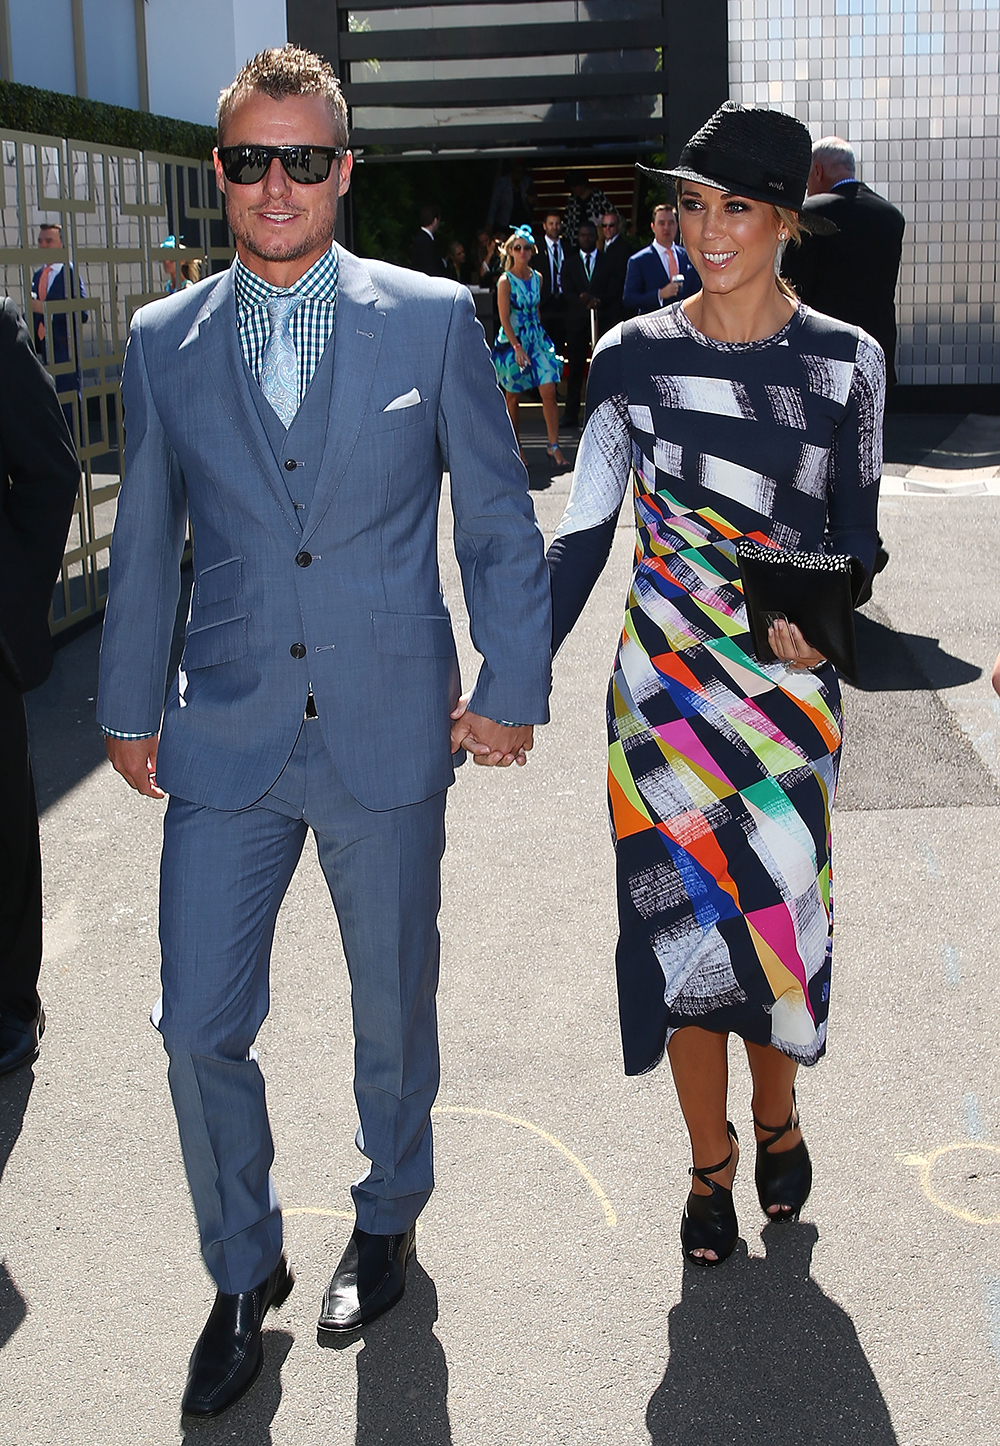 Lleyton and Bec Hewitt at the Melbourne Cup, 2015